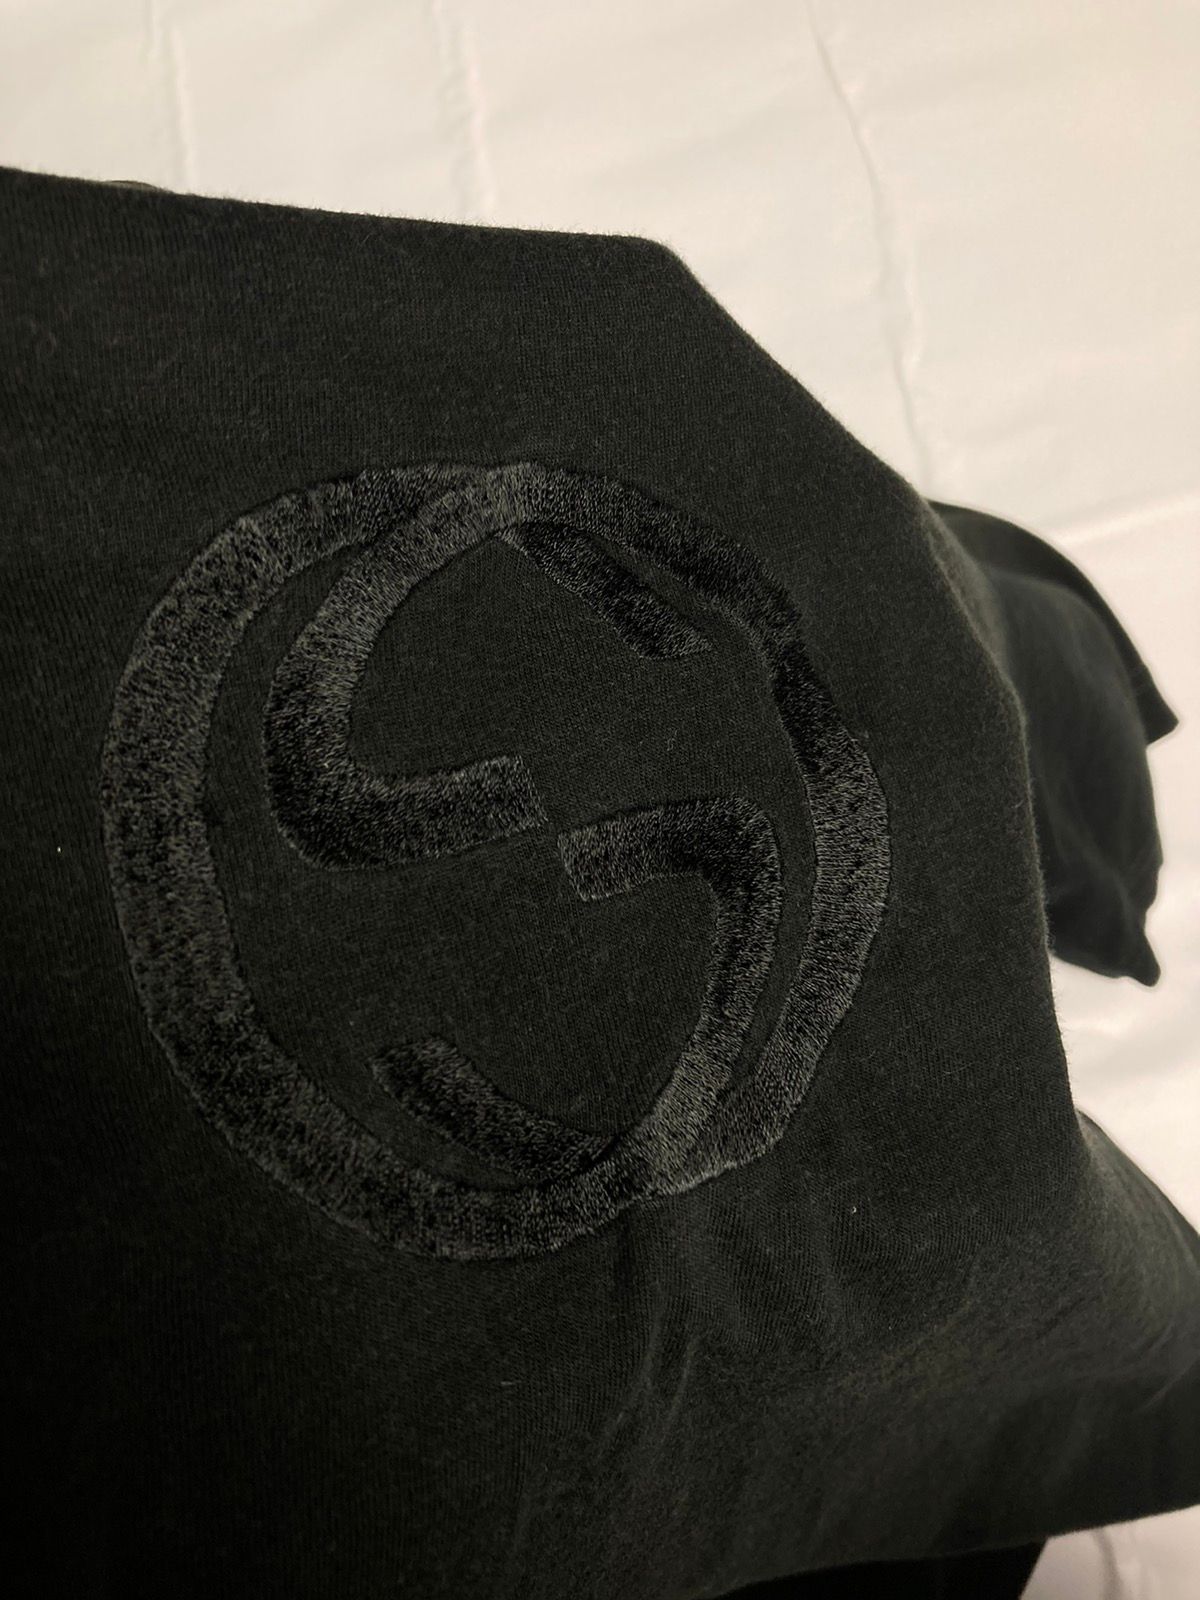 Gucci Embroidery Big Logo Shirt Made in Italy - 15